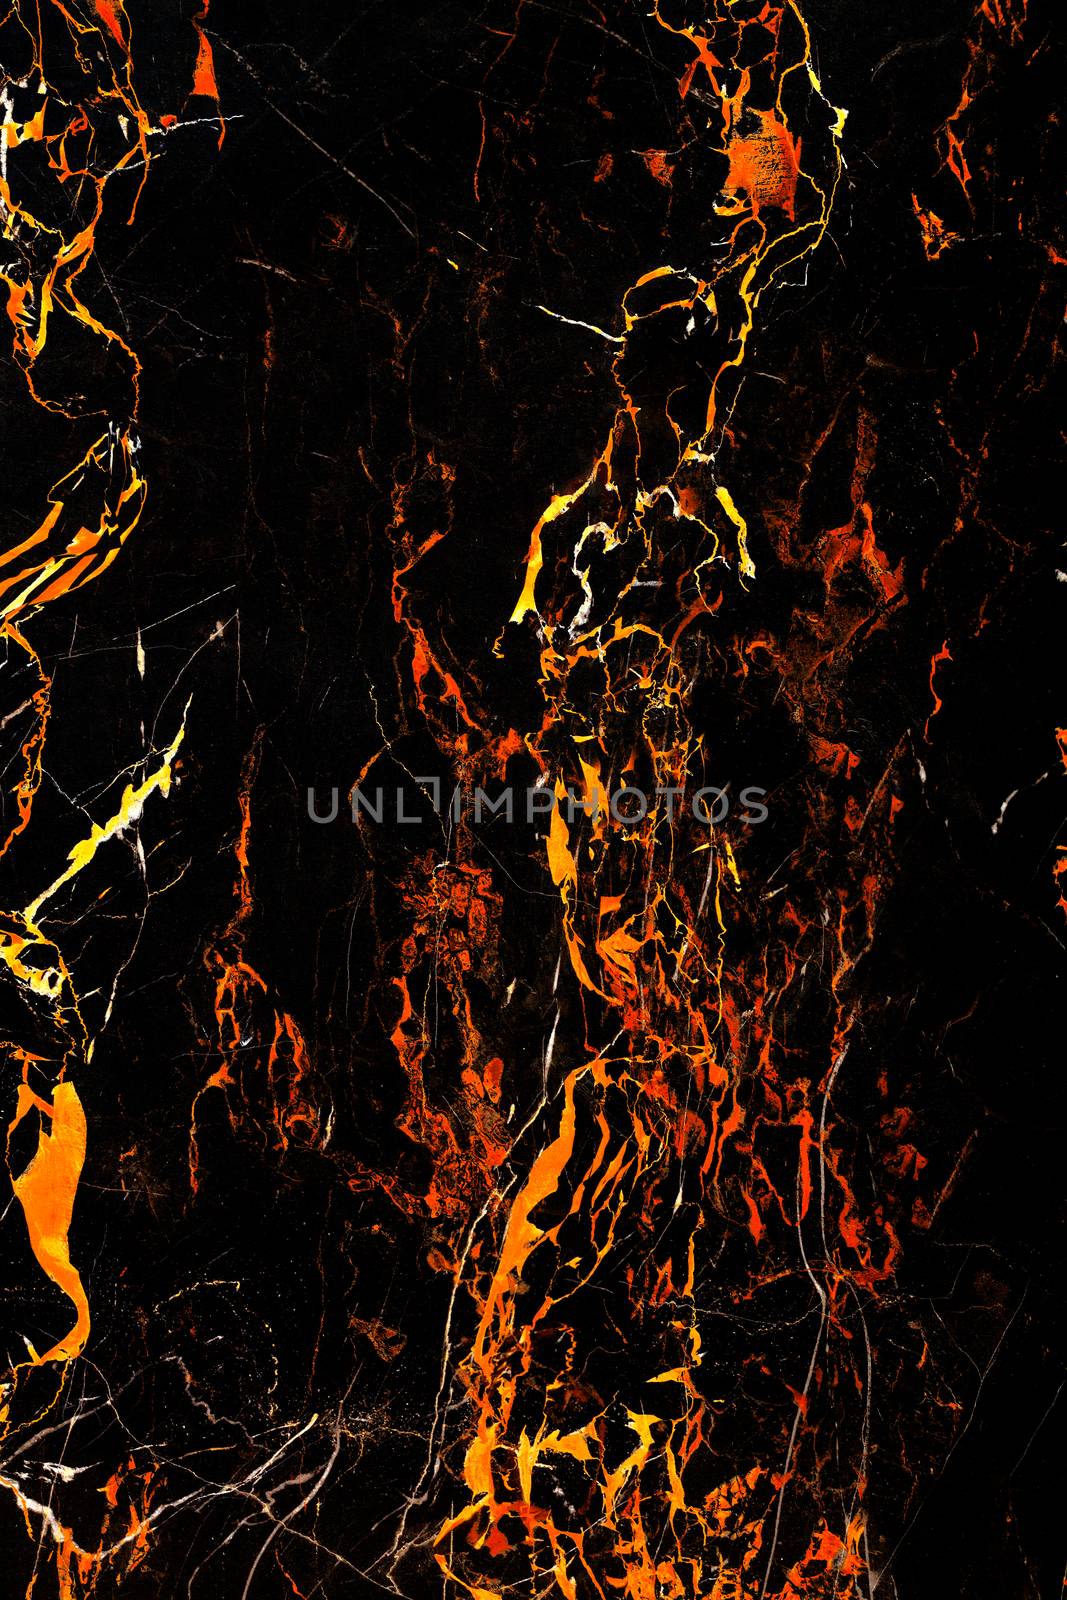 Unusual and mysterious black marble texture with orange veins and fiery tongues. Polished surface. by Sergii